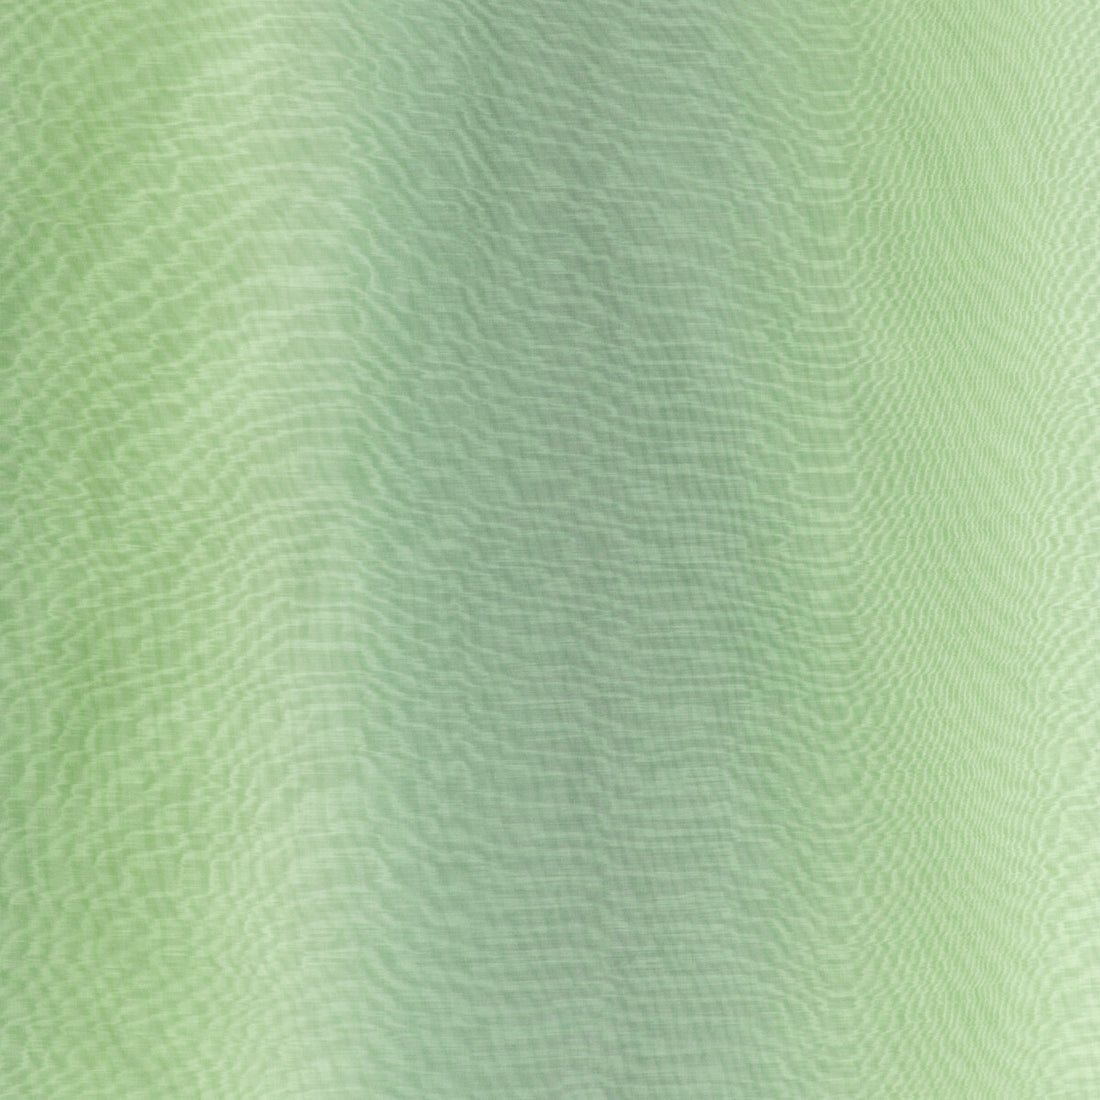 Horizonte fabric in palm color - pattern 2020214.3.0 - by Lee Jofa in the Oscar De La Renta IV collection